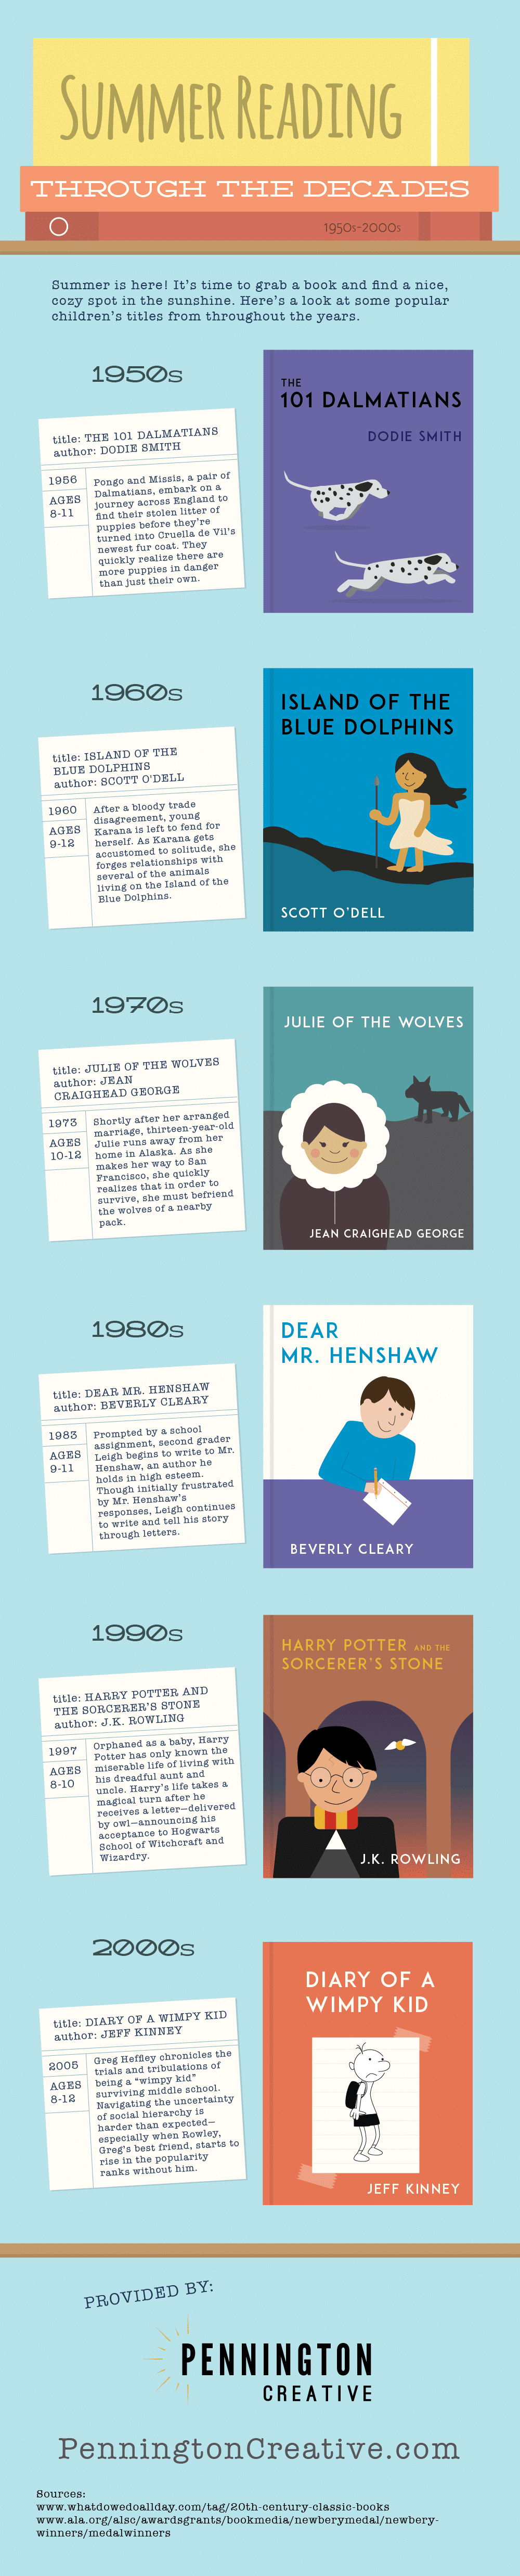 Summer Reading Infographic